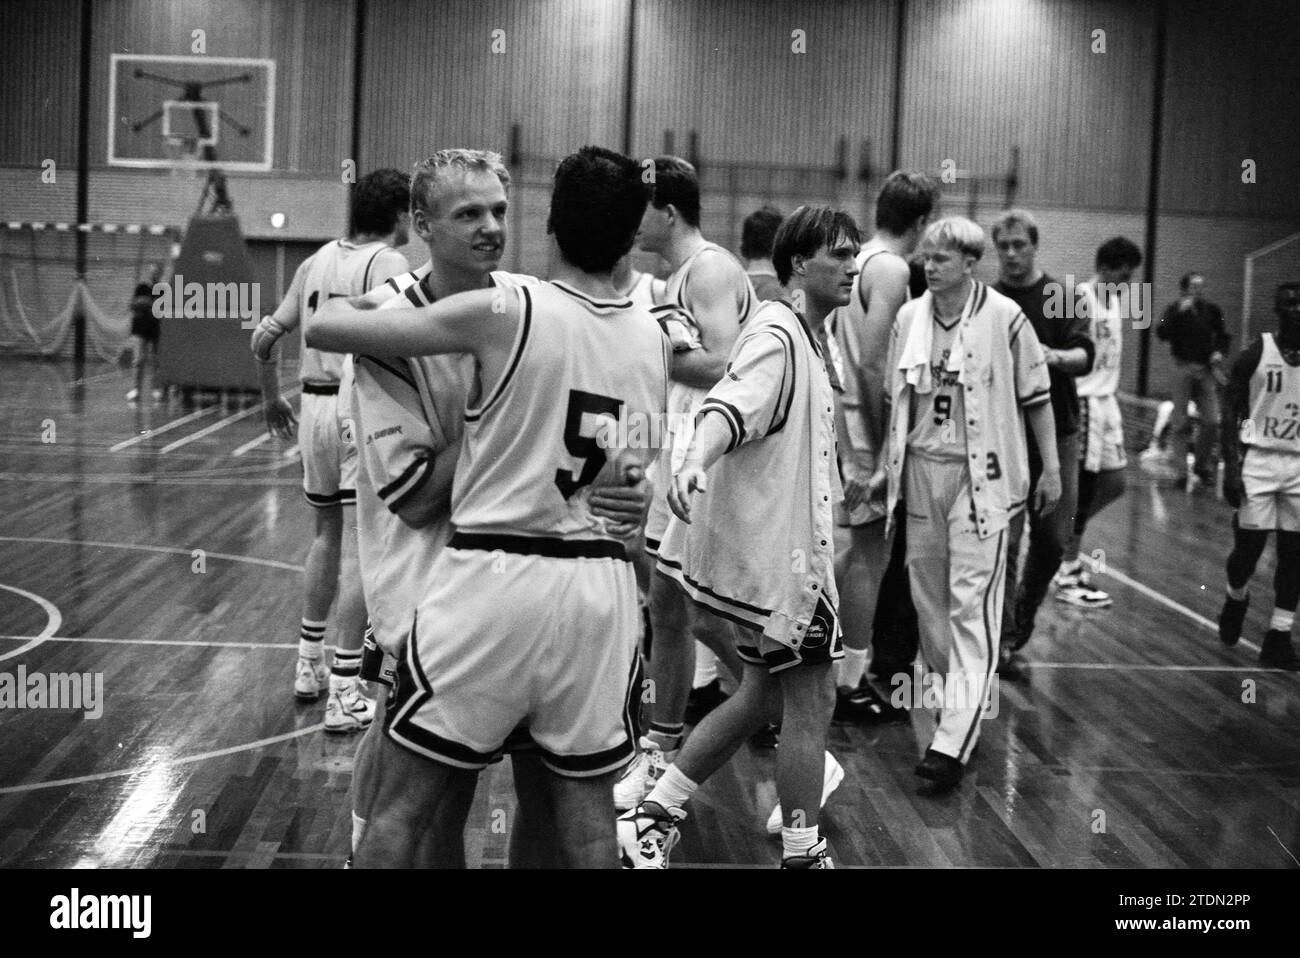 Basketball Holland Inn Akrides- RZG/Donar, 23-09-1993, Whizgle News from the Past, Tailored for the Future. Explore historical narratives, Dutch The Netherlands agency image with a modern perspective, bridging the gap between yesterday's events and tomorrow's insights. A timeless journey shaping the stories that shape our future Stock Photo